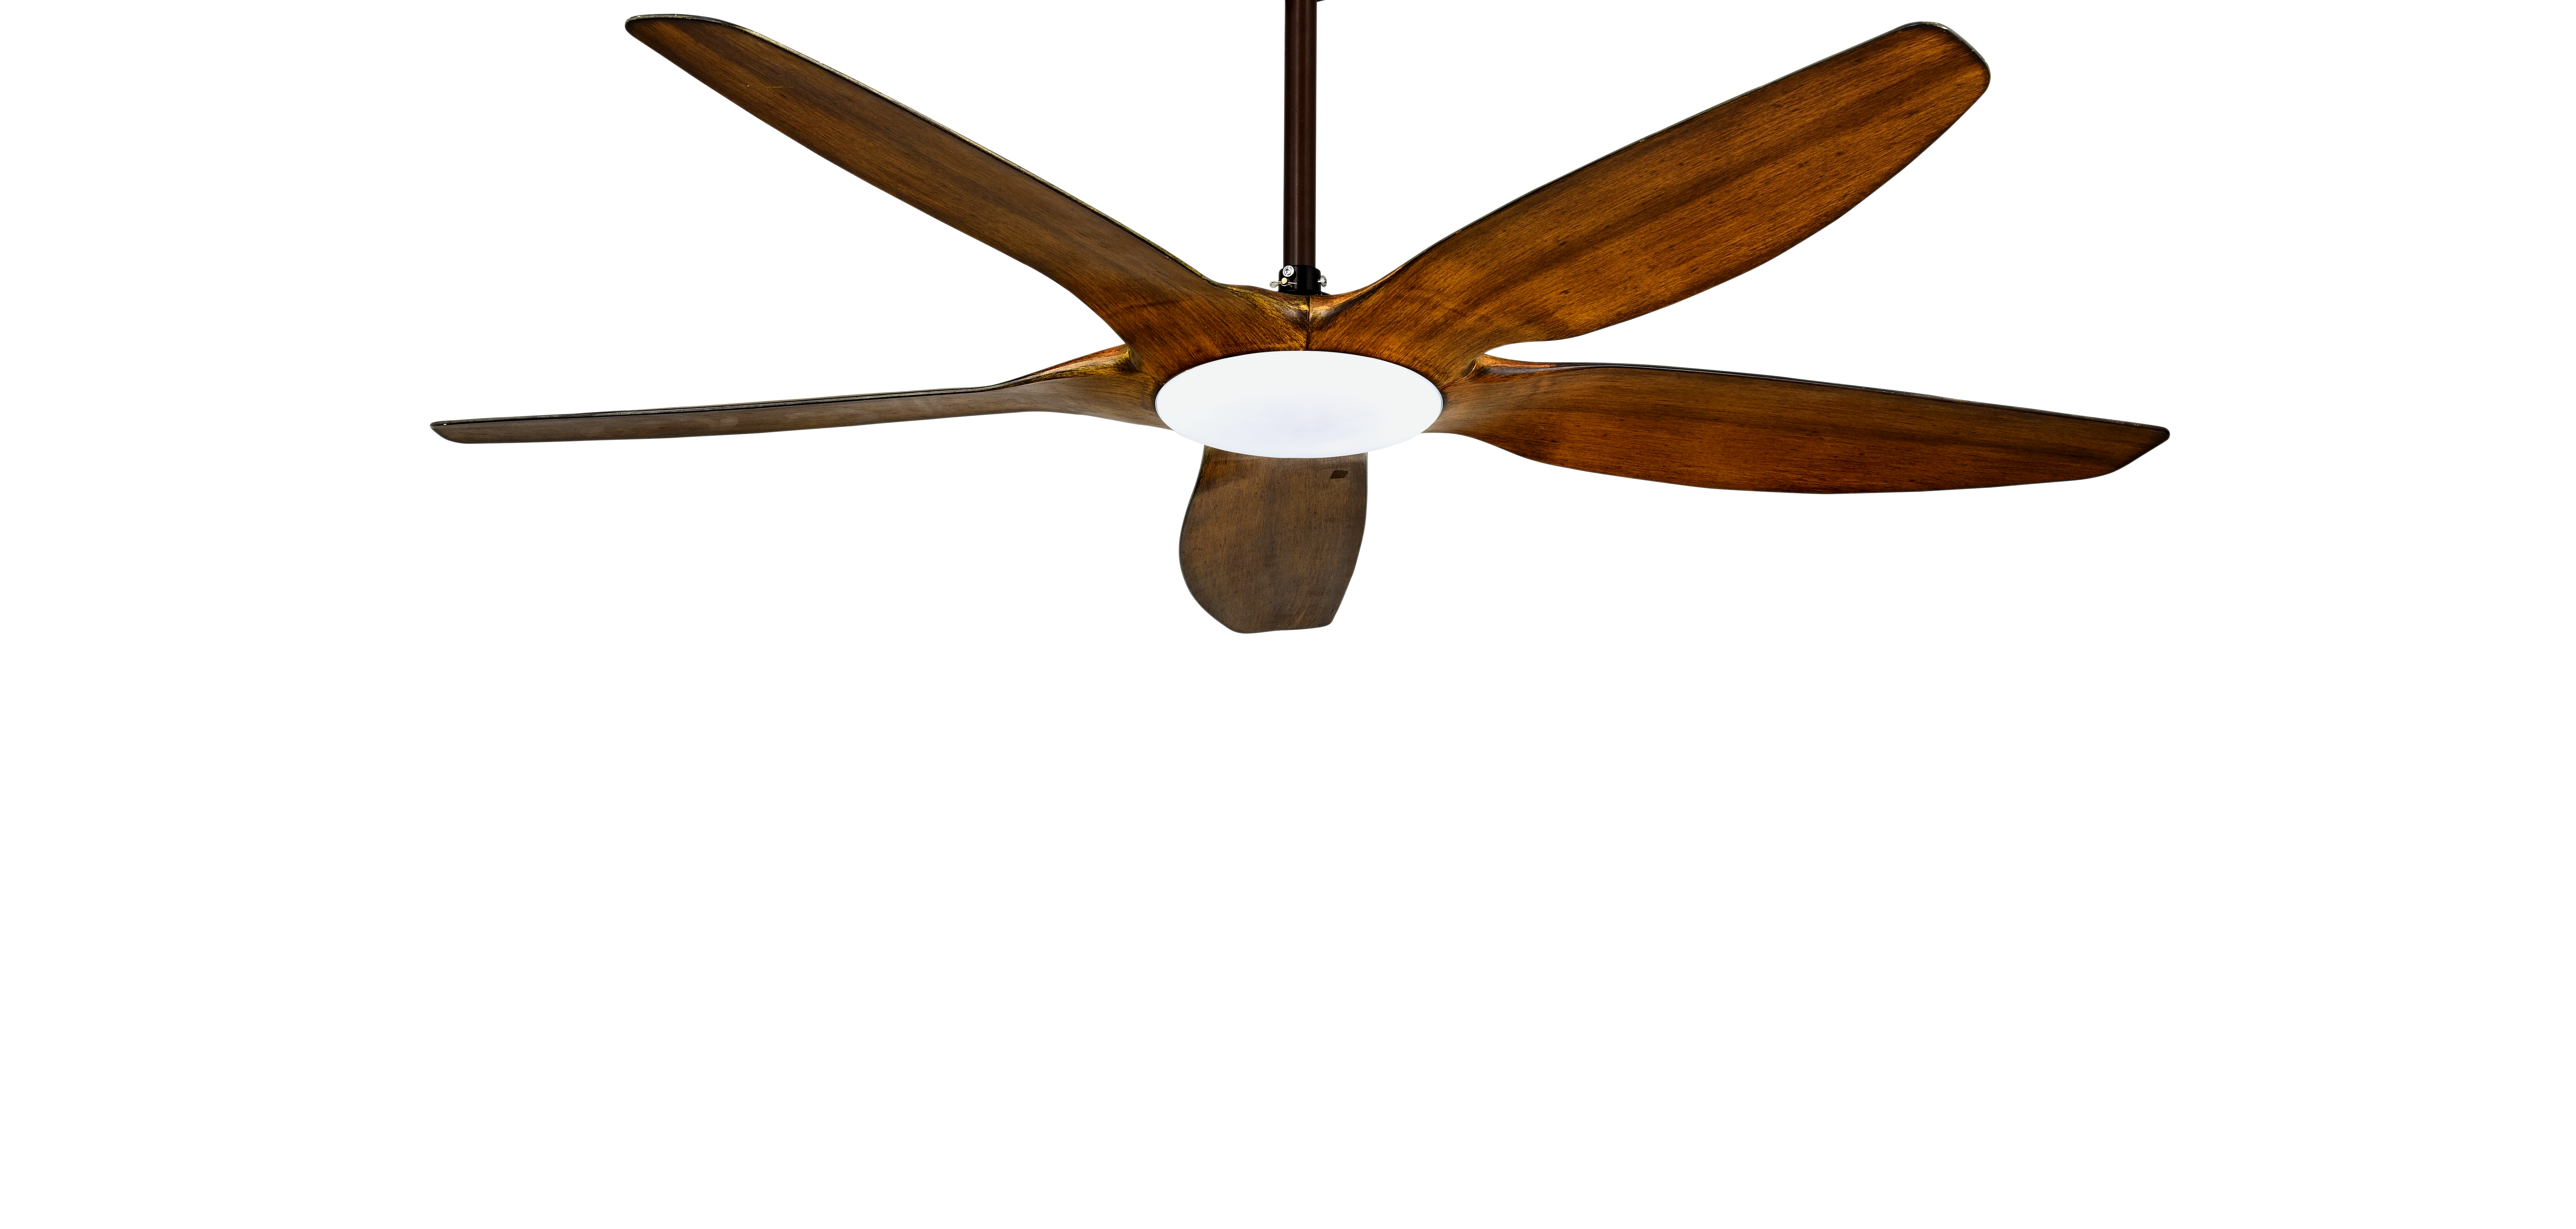 High Quality Decorative 3-Piece Led Simple 8-Inch Remote Control Ceiling Fan With Led Light